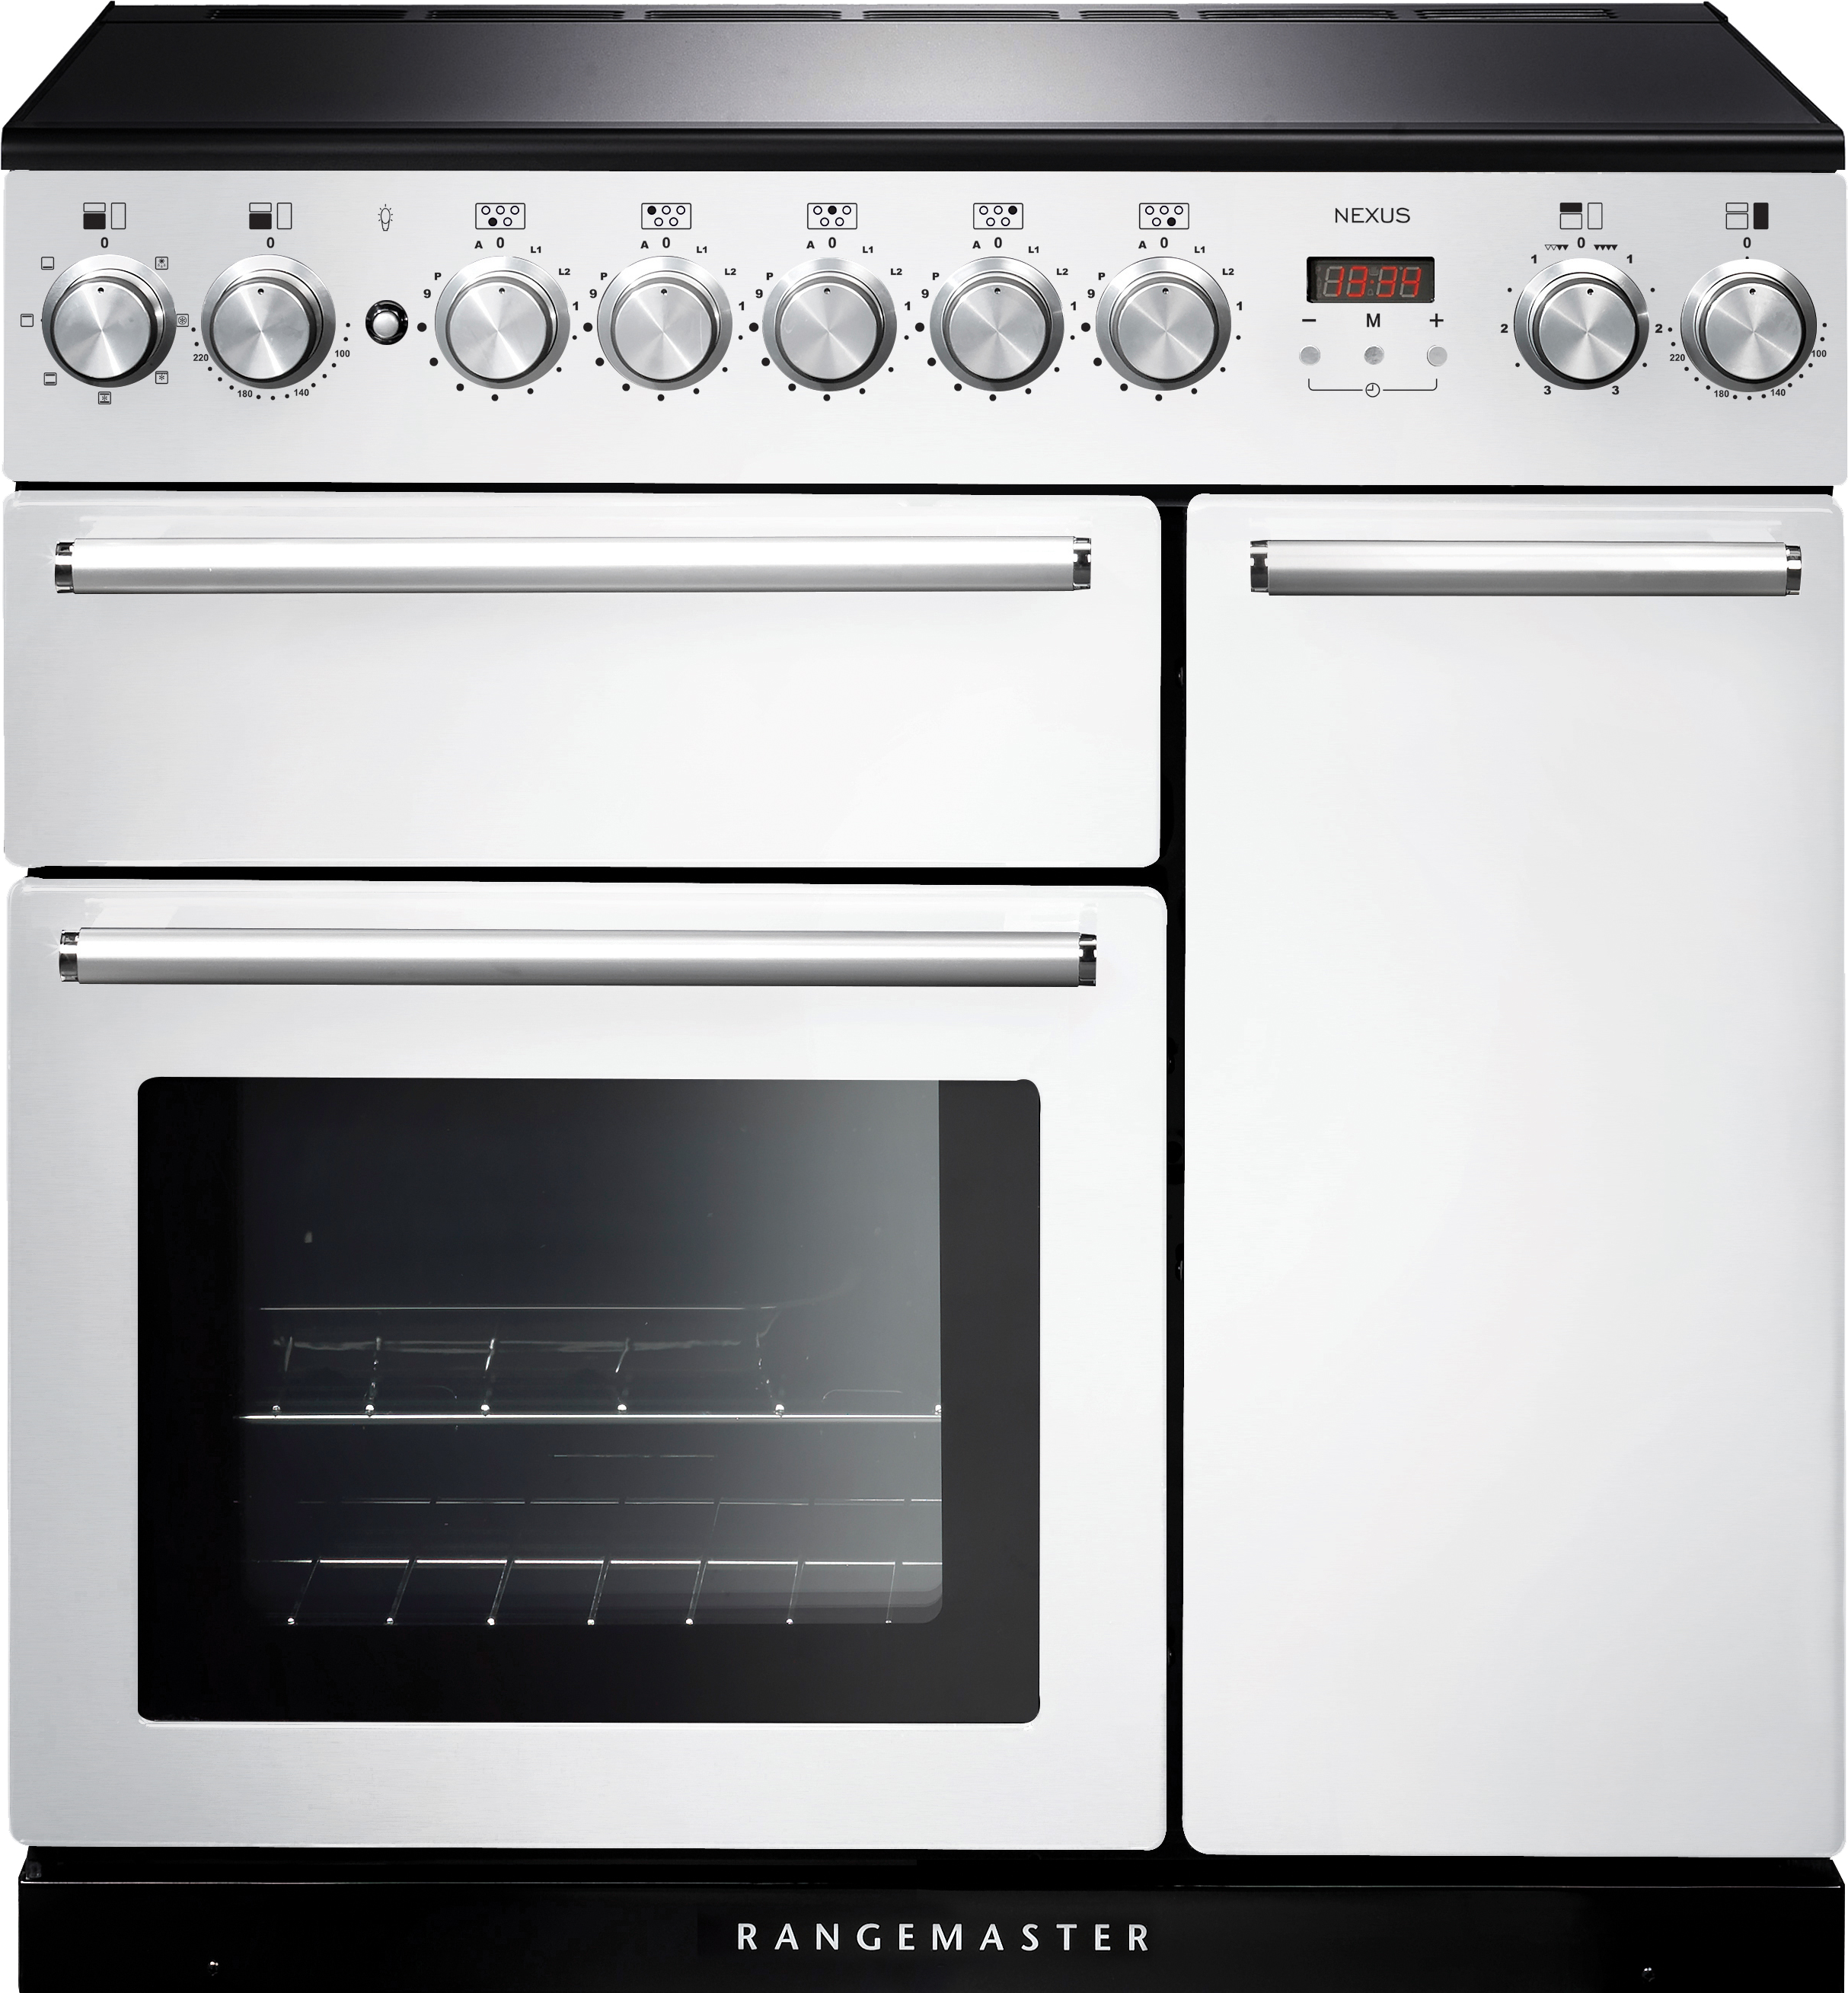 Rangemaster Nexus NEX90EIWH/C 90cm Electric Range Cooker with Induction Hob - White / Chrome - A/A Rated, White